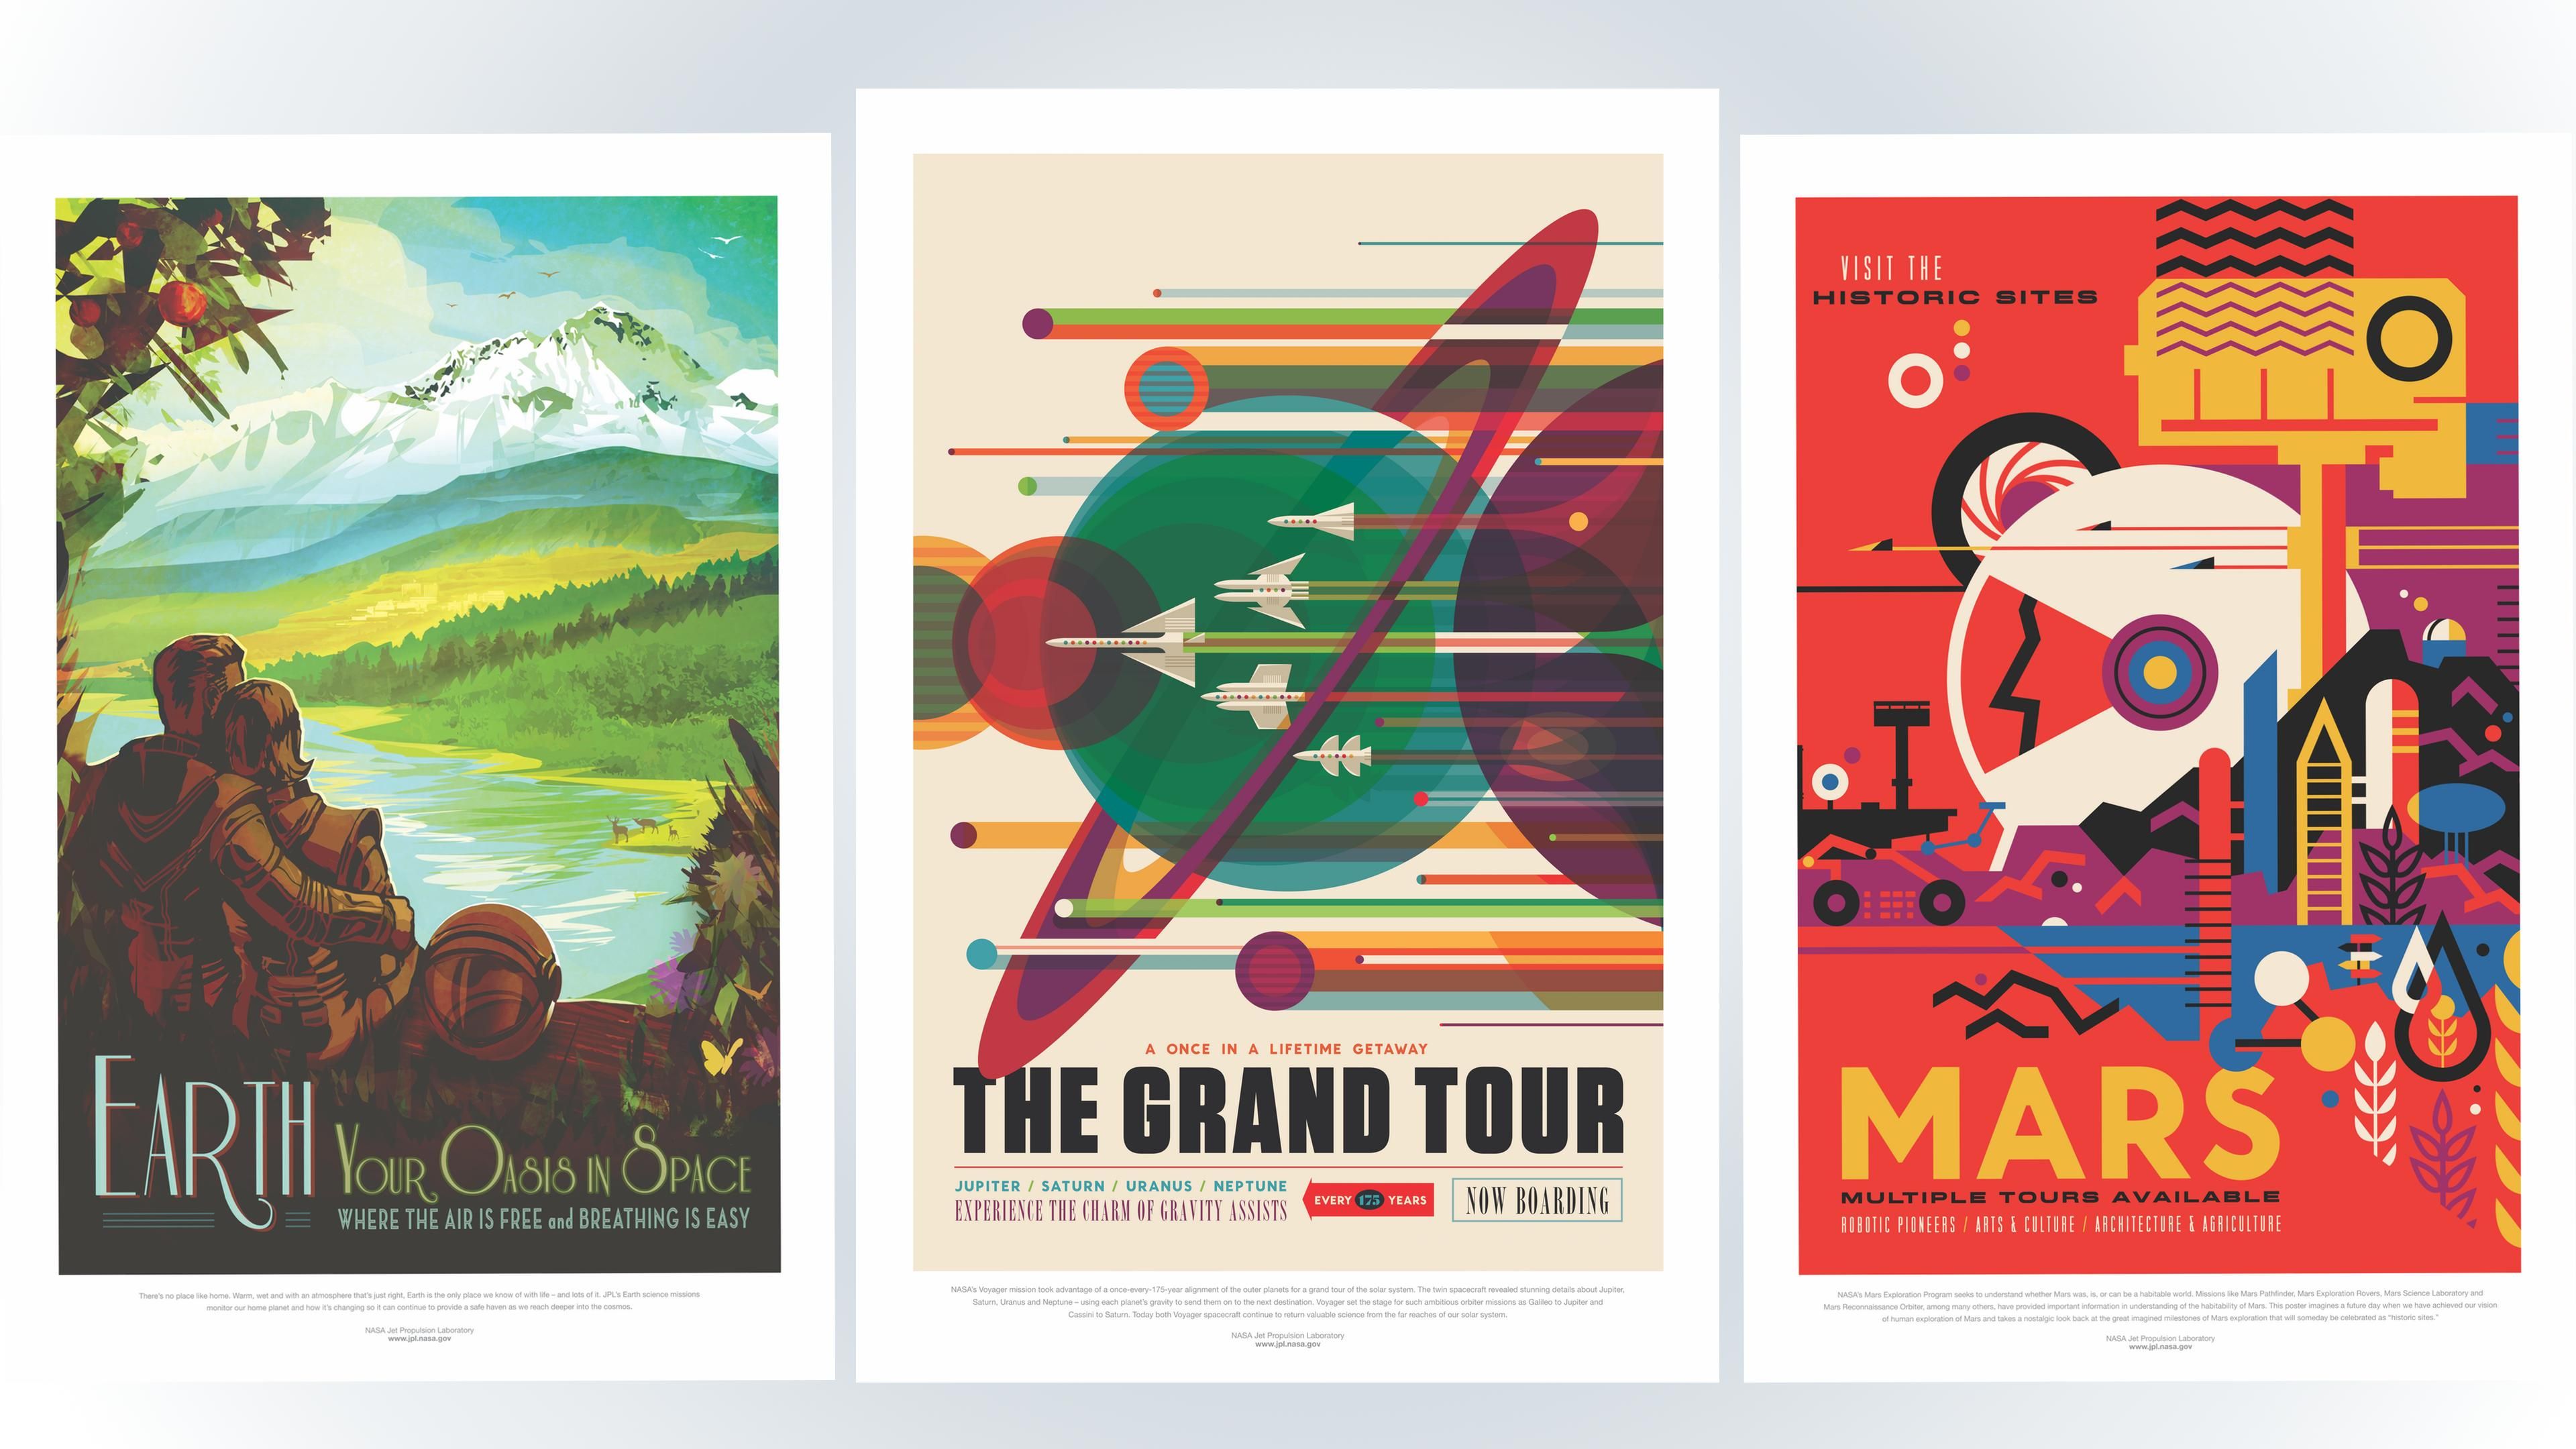 Space Tourism Posters - HD Wallpaper 